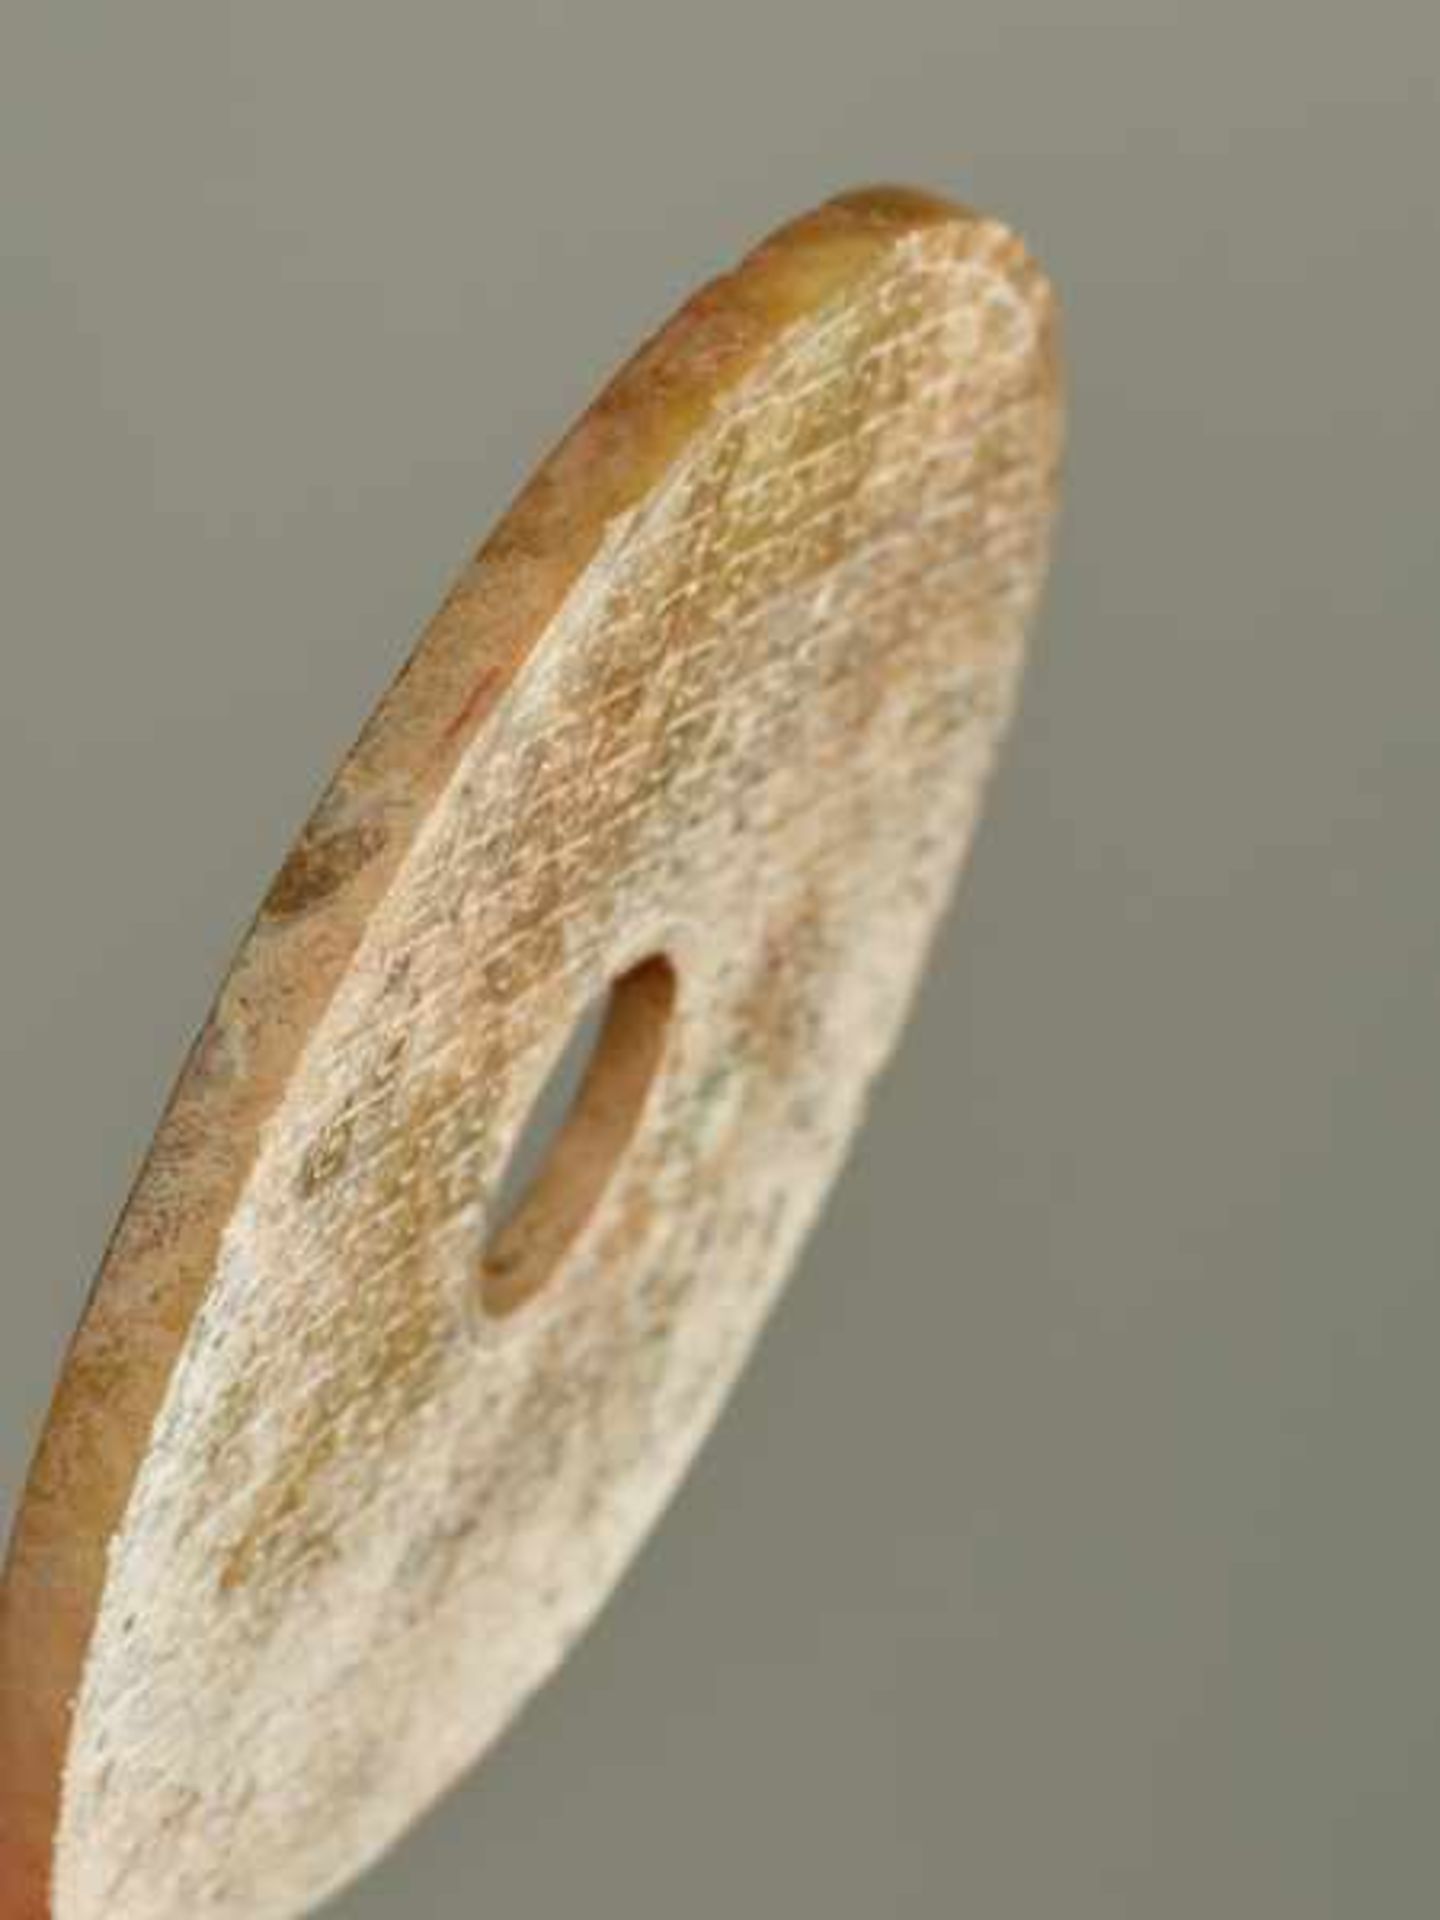 AN INTERESTING PARTLY CALCIFIED BI DISC WITH A GLASSY POLISH AND AN INCISED PATTERN OF LINKED - Image 8 of 8